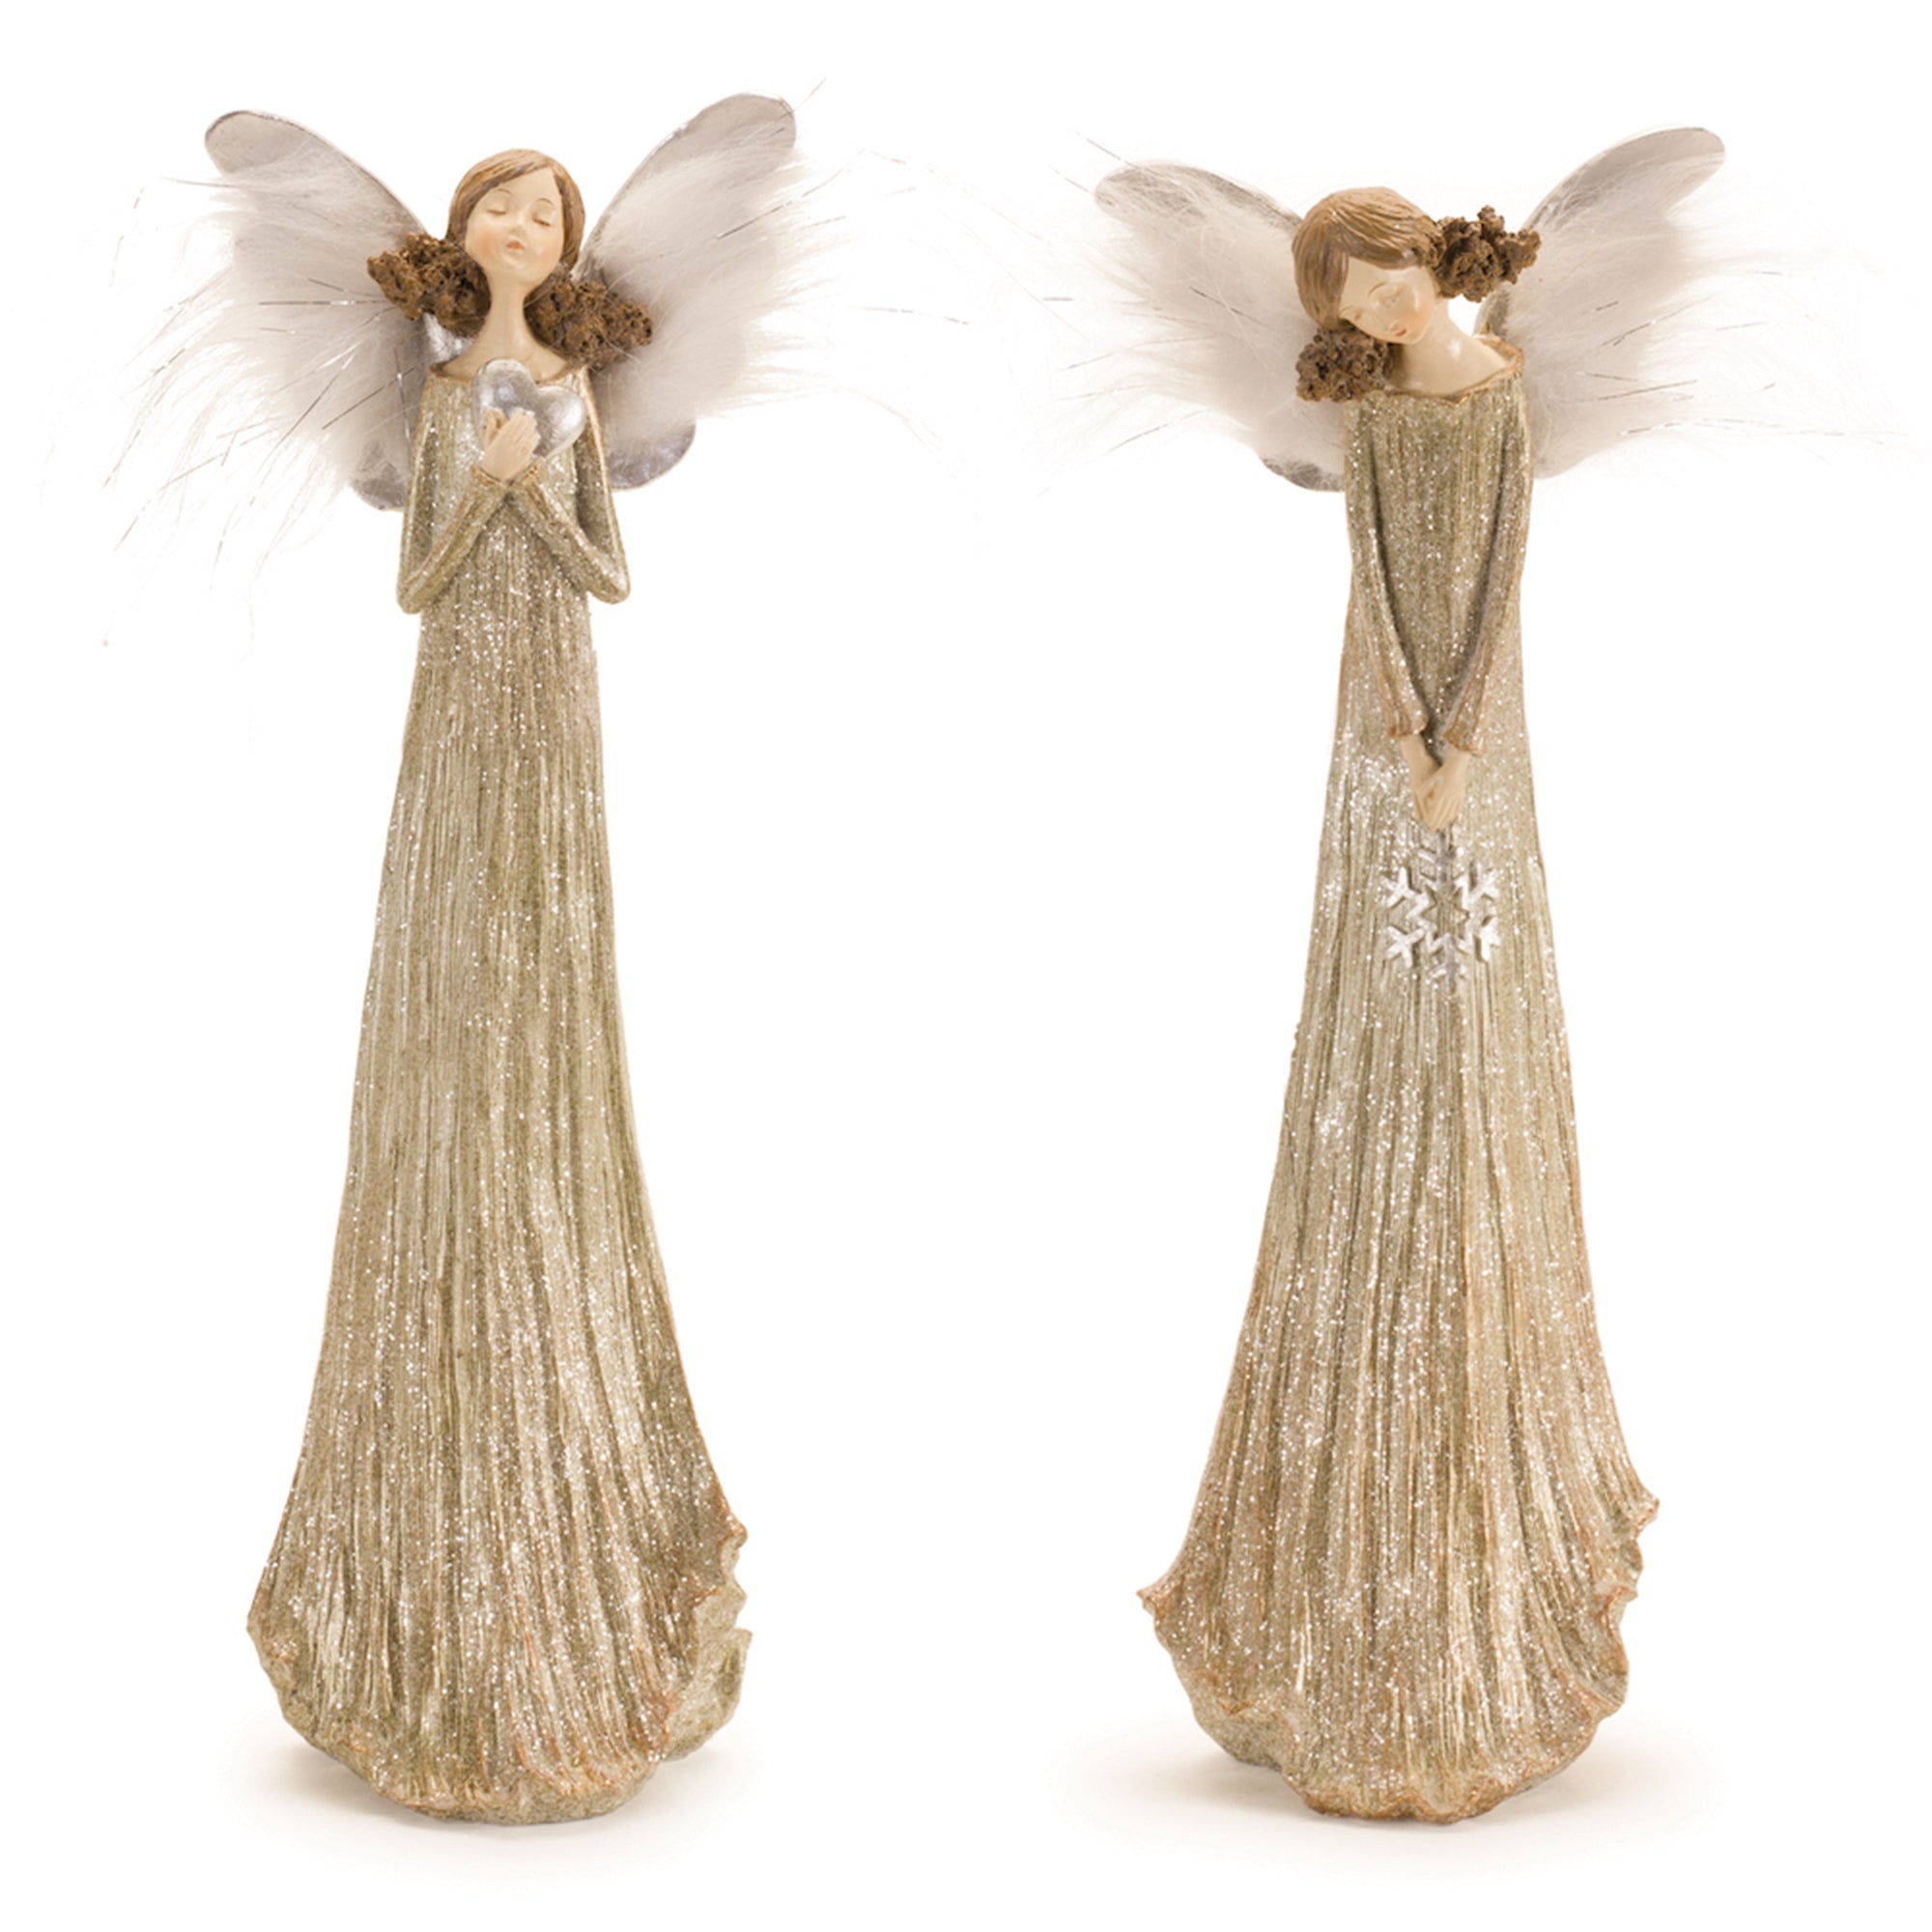 Glittered Angel with Feather Wings (Set of 2)